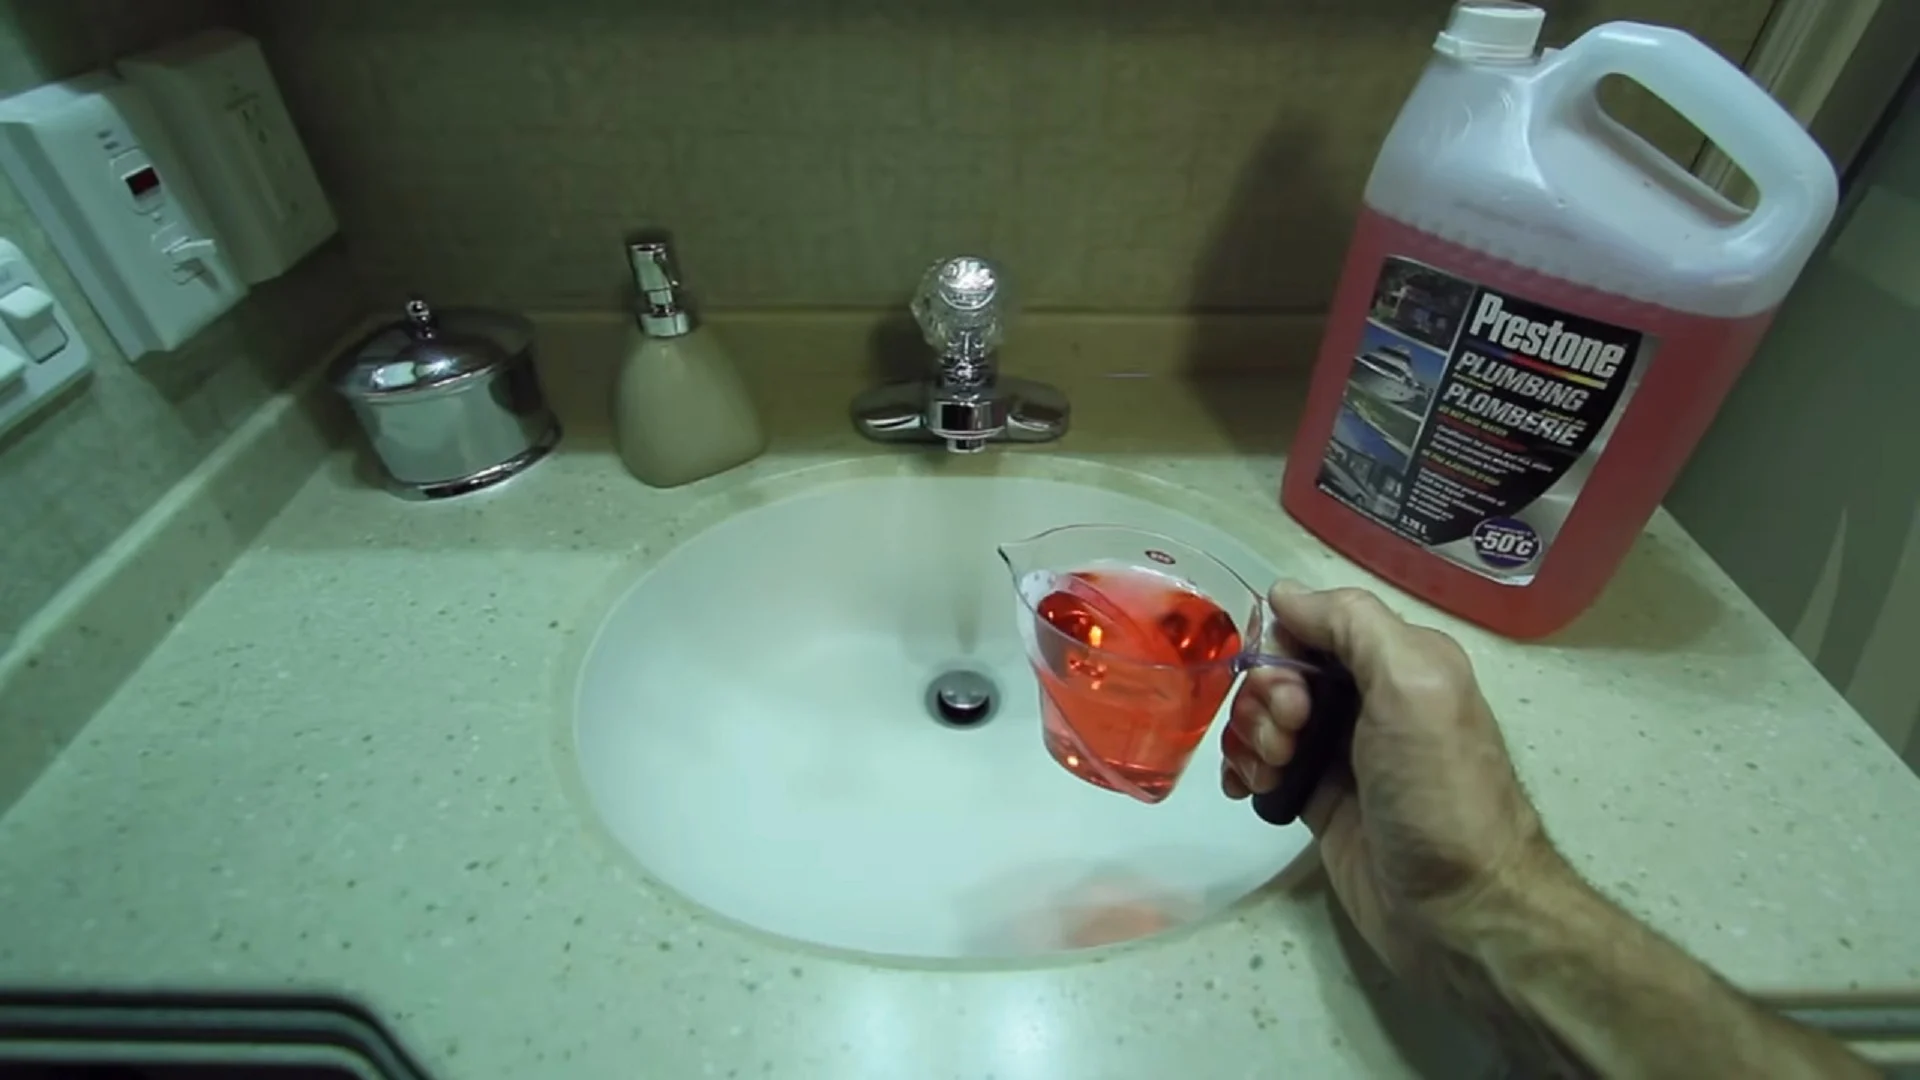 RV antifreeze can thoroughly winterize the water lines of an RV.